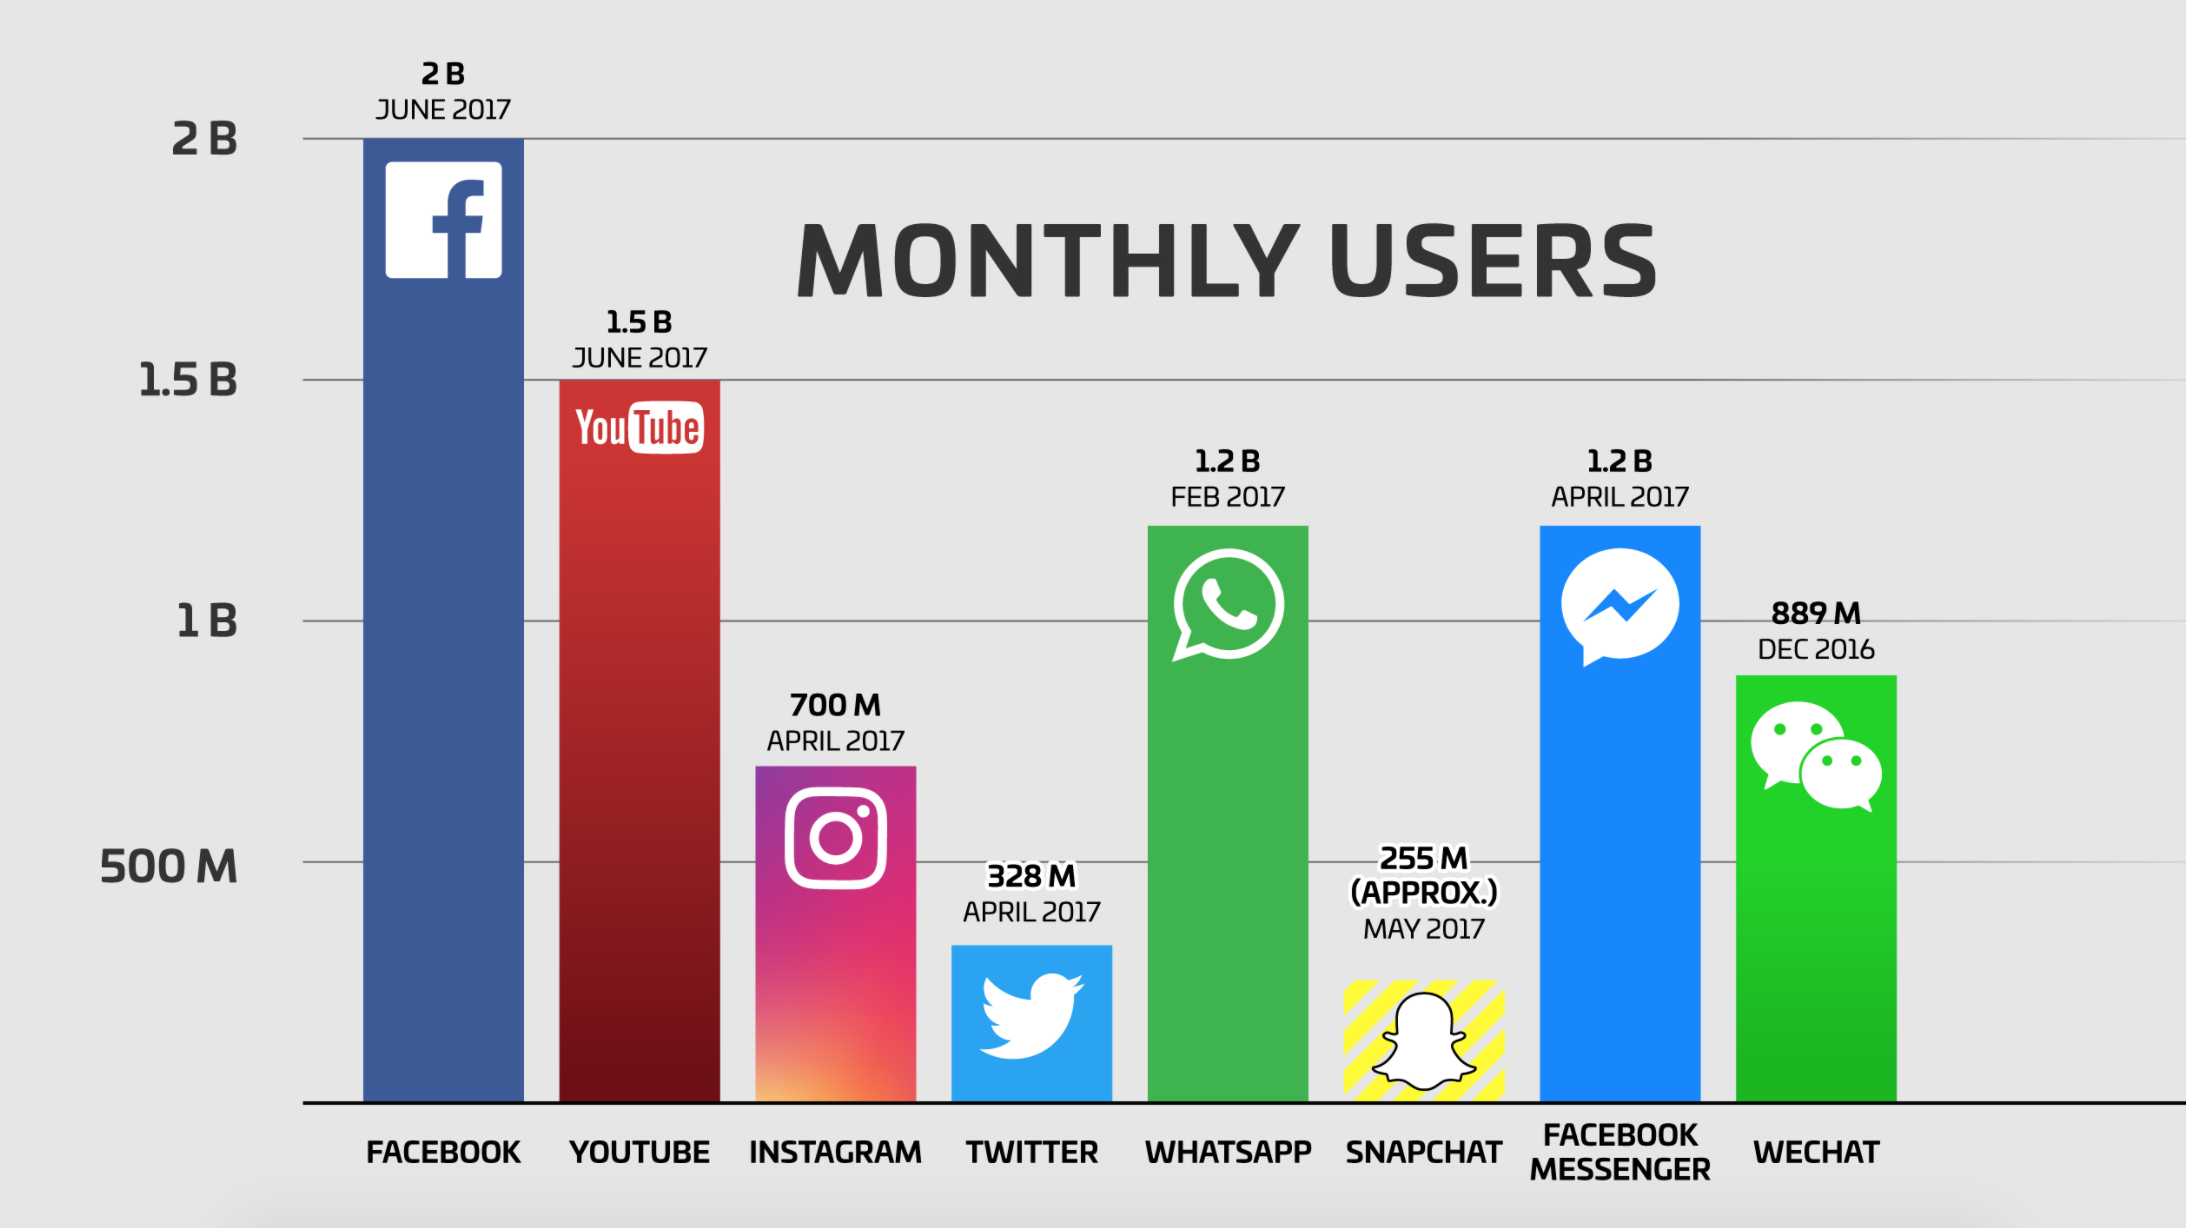 Monthly Users - Facebook, Twitter, Instagram, Snapchat, etc.